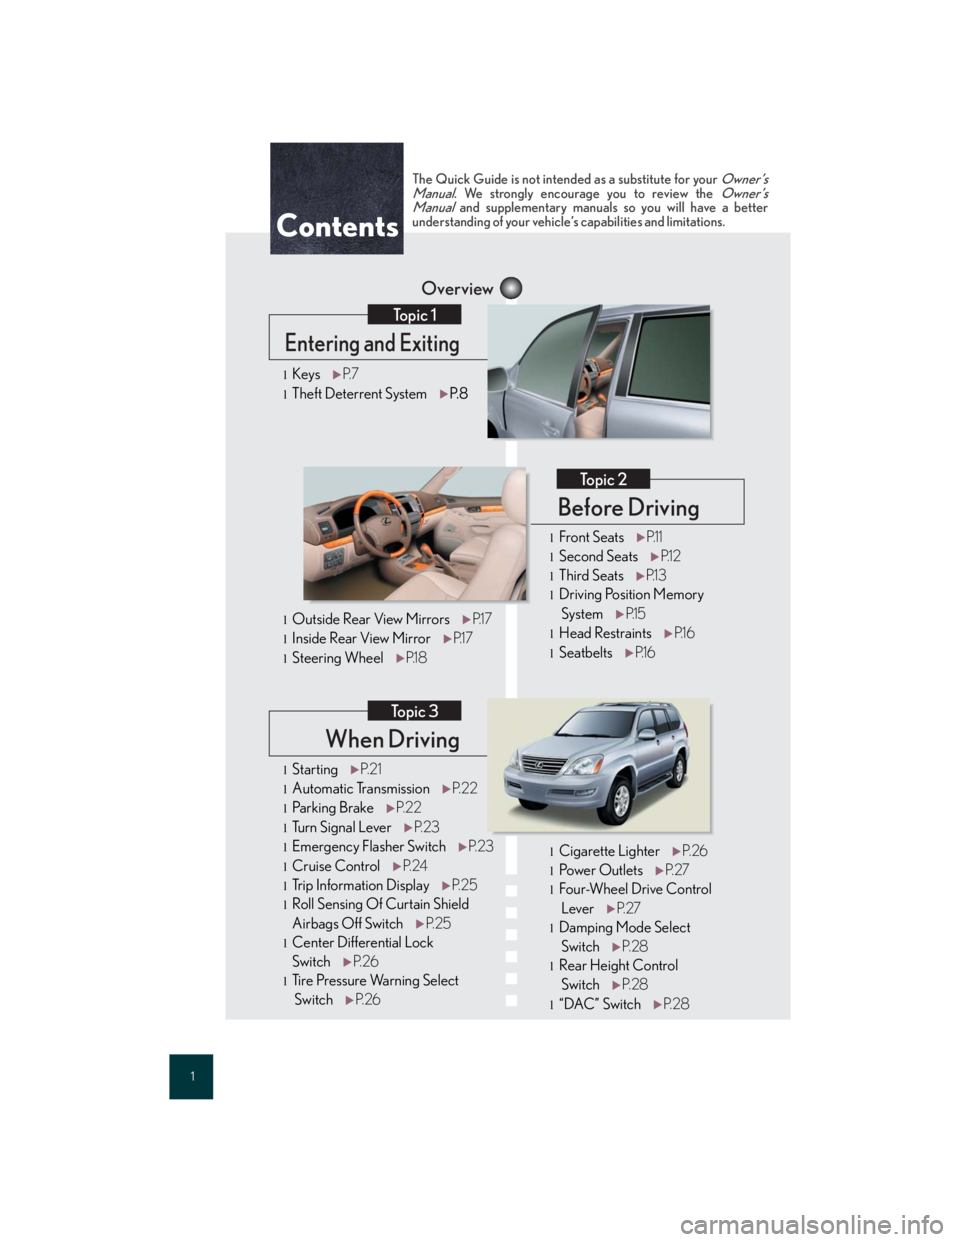 Lexus GX470 2007  Using other driving systems / LEXUS 2007 GX470 QUICK REFERENCE MANUAL 1
When Driving
Topic 3
Overview
Contents
Entering and Exiting
Topic 1
Before Driving
Topic 2
lStartingP. 2 1
lAutomatic TransmissionP. 2 2
lParking BrakeP. 2 2
lTu r n  S i g n a l  L e v e rP. 2 3
lE